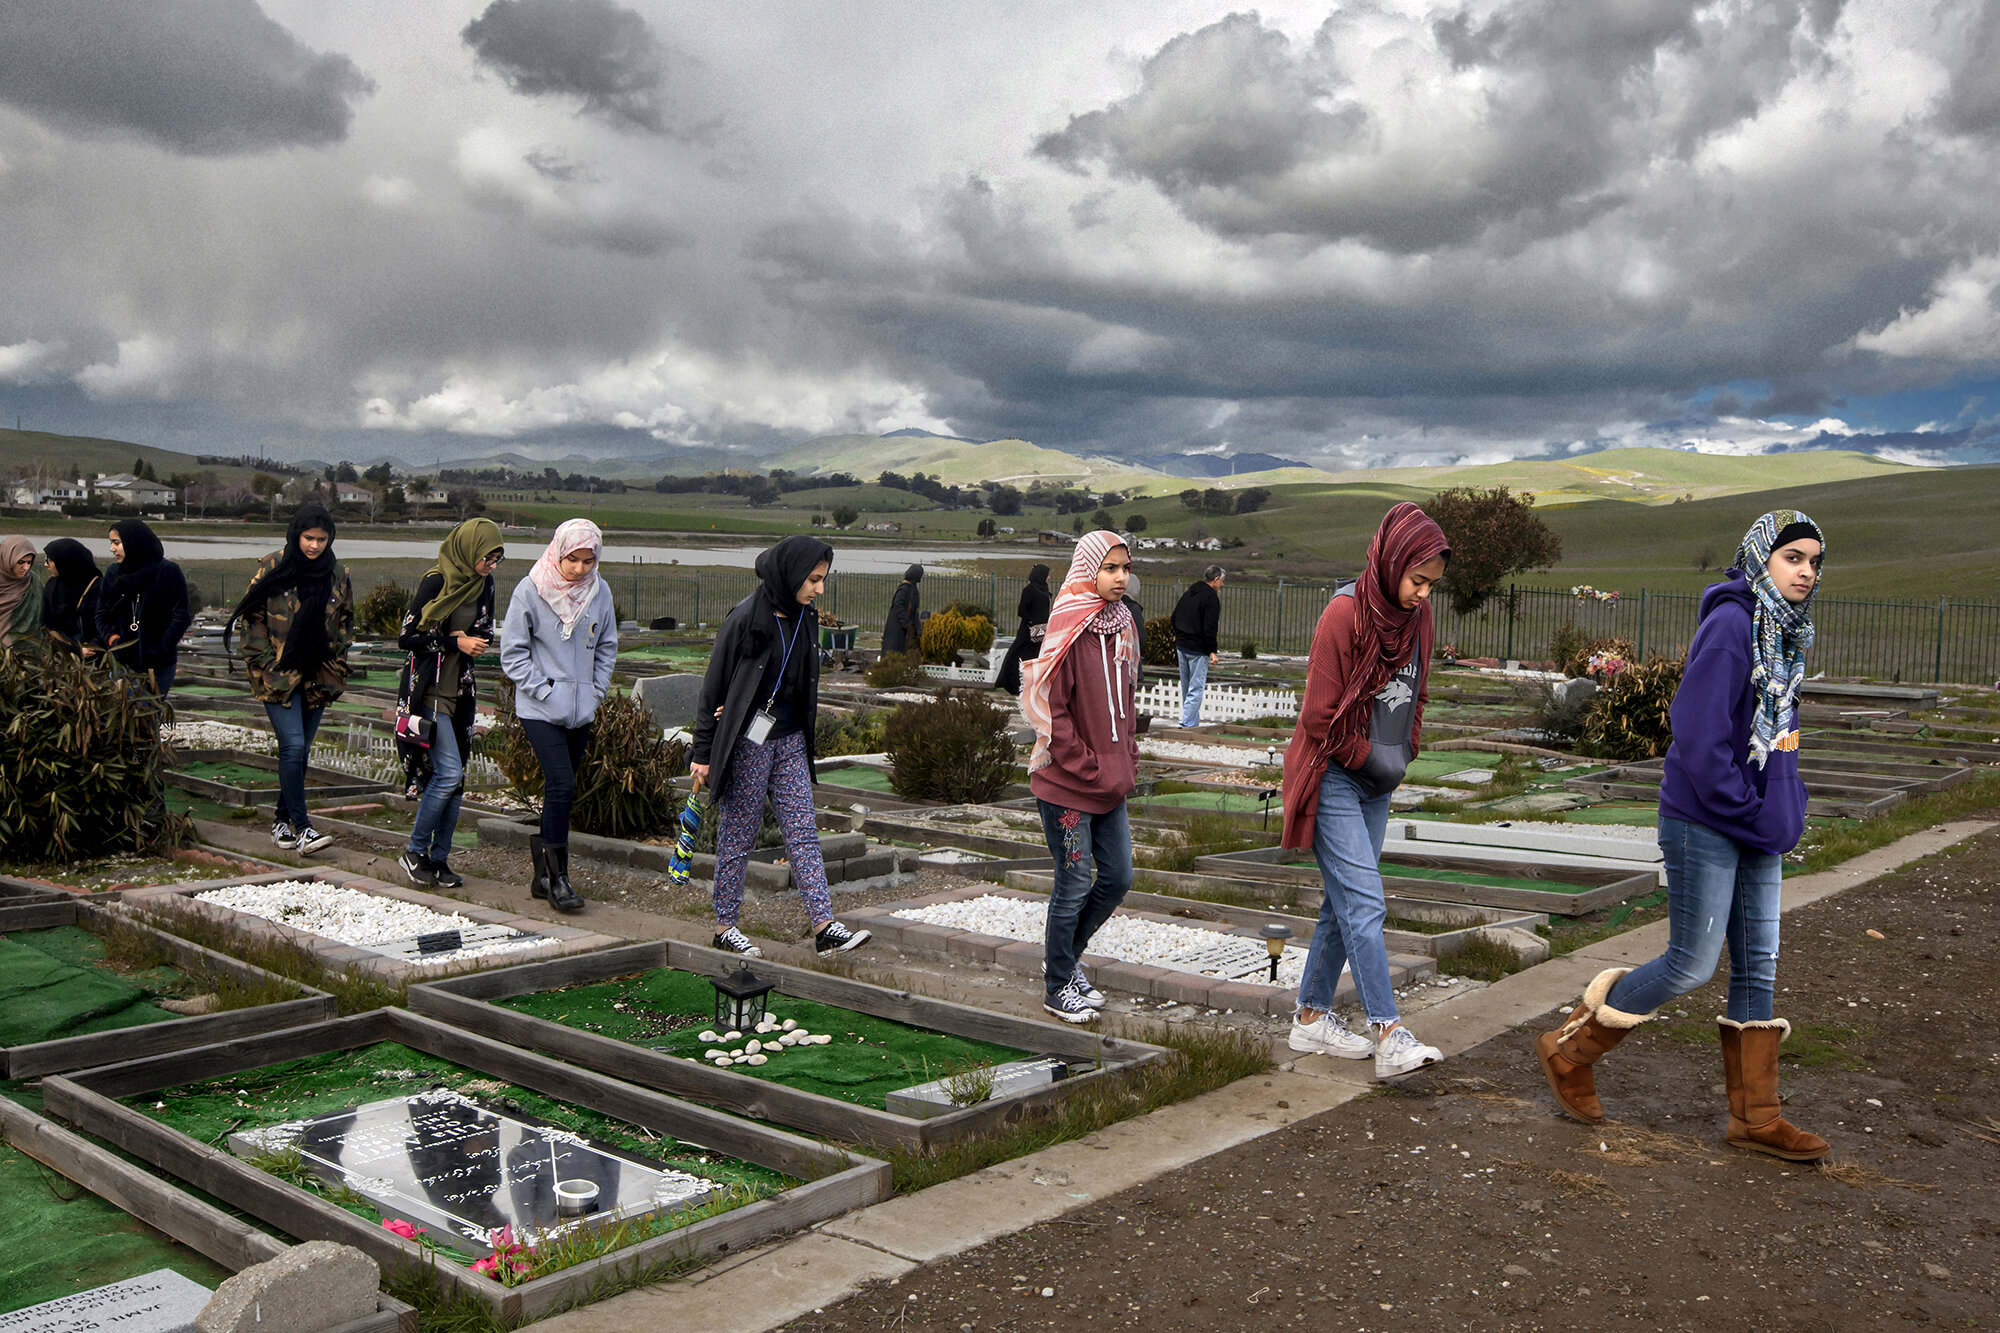   USA. Livermore, California. 2018. A group of female students walk around the Five Pillars Farm Islamic graveyard during a lecture titled, 'Visit to the Graveyard &amp; Gravesite Reminders'. The lecture was taught by a renowned Islamic scholar, Imam